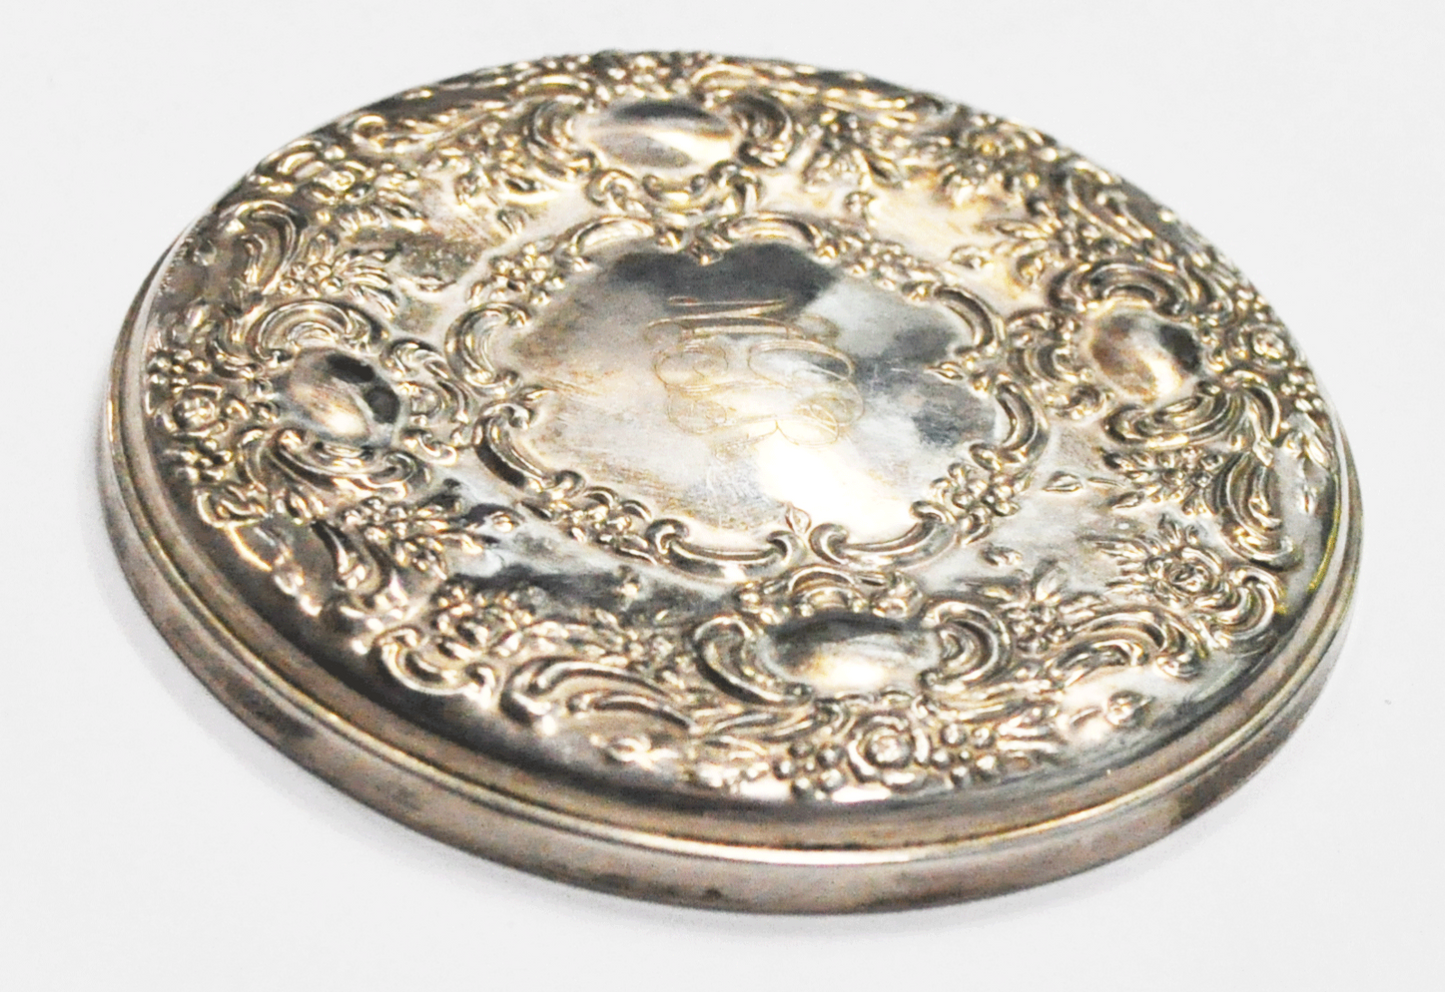 Vintage Silver Plated Compact Mirror Scroll Pattern 3-1/4"